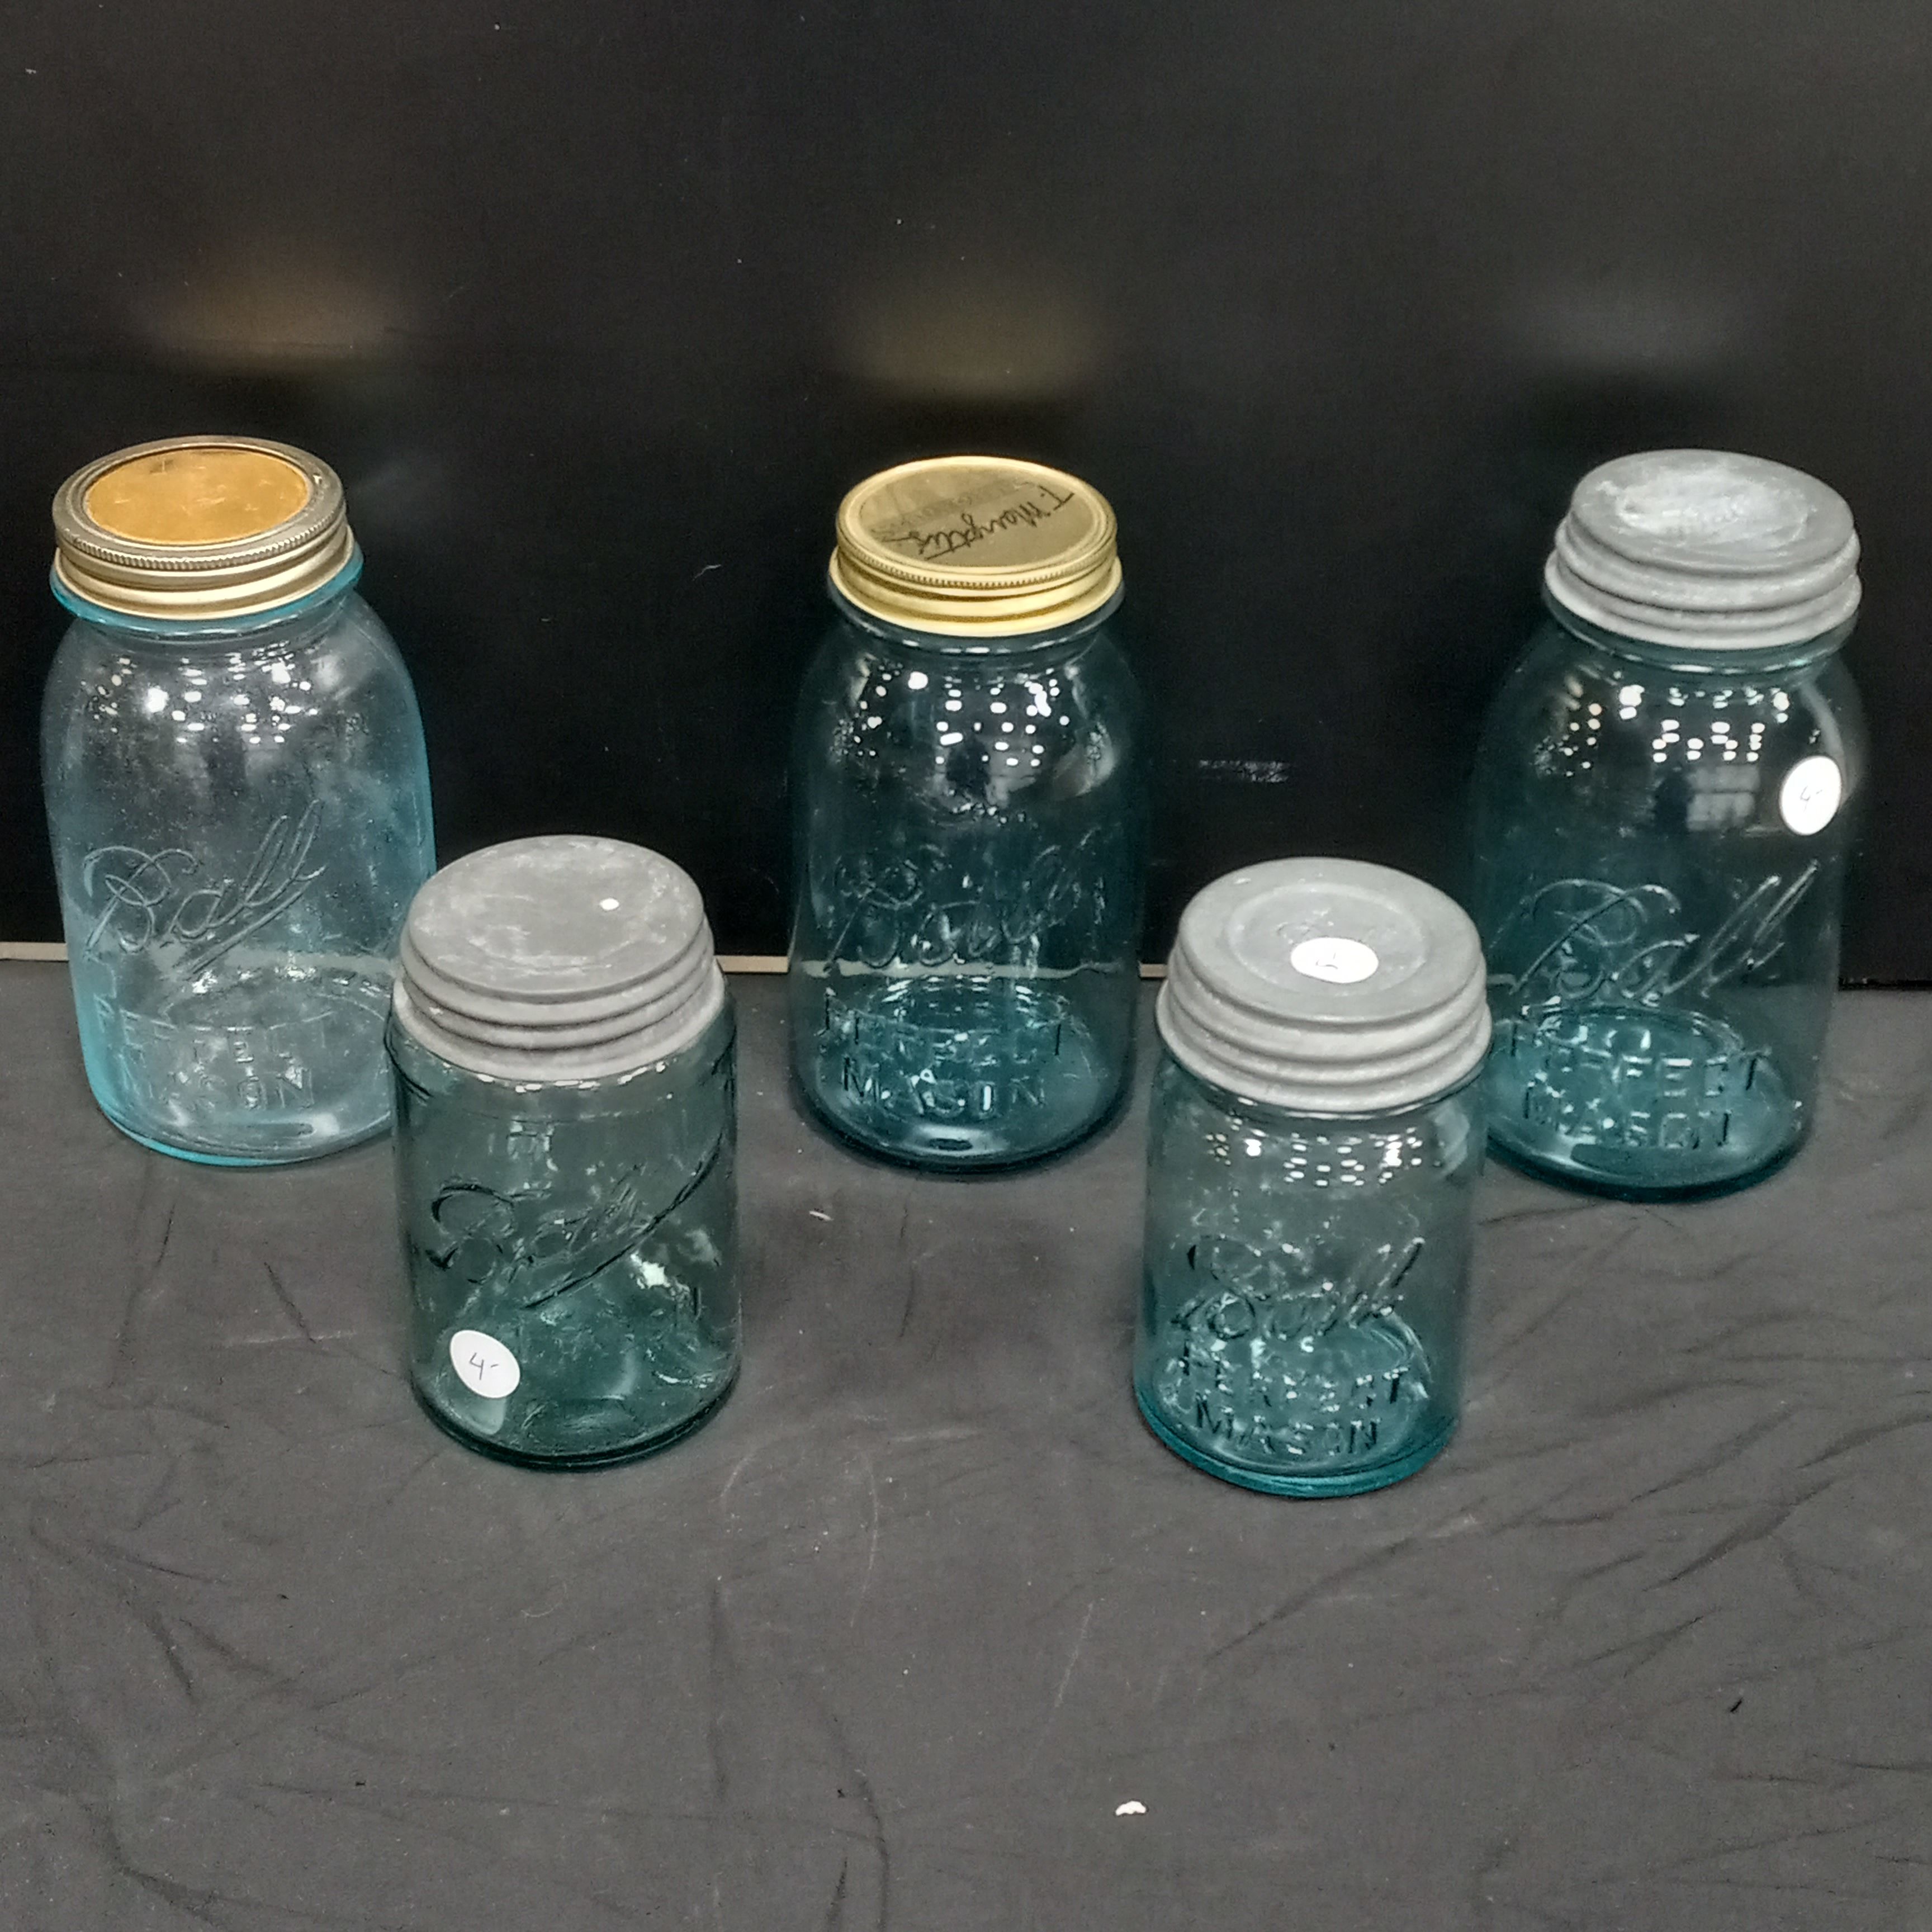 Lighted Jar Collection, Handpainted Standard Pint Mason Jars, 5 Inches Tall  With Battery Operated Tea Light Included. Jars Sold Individually 